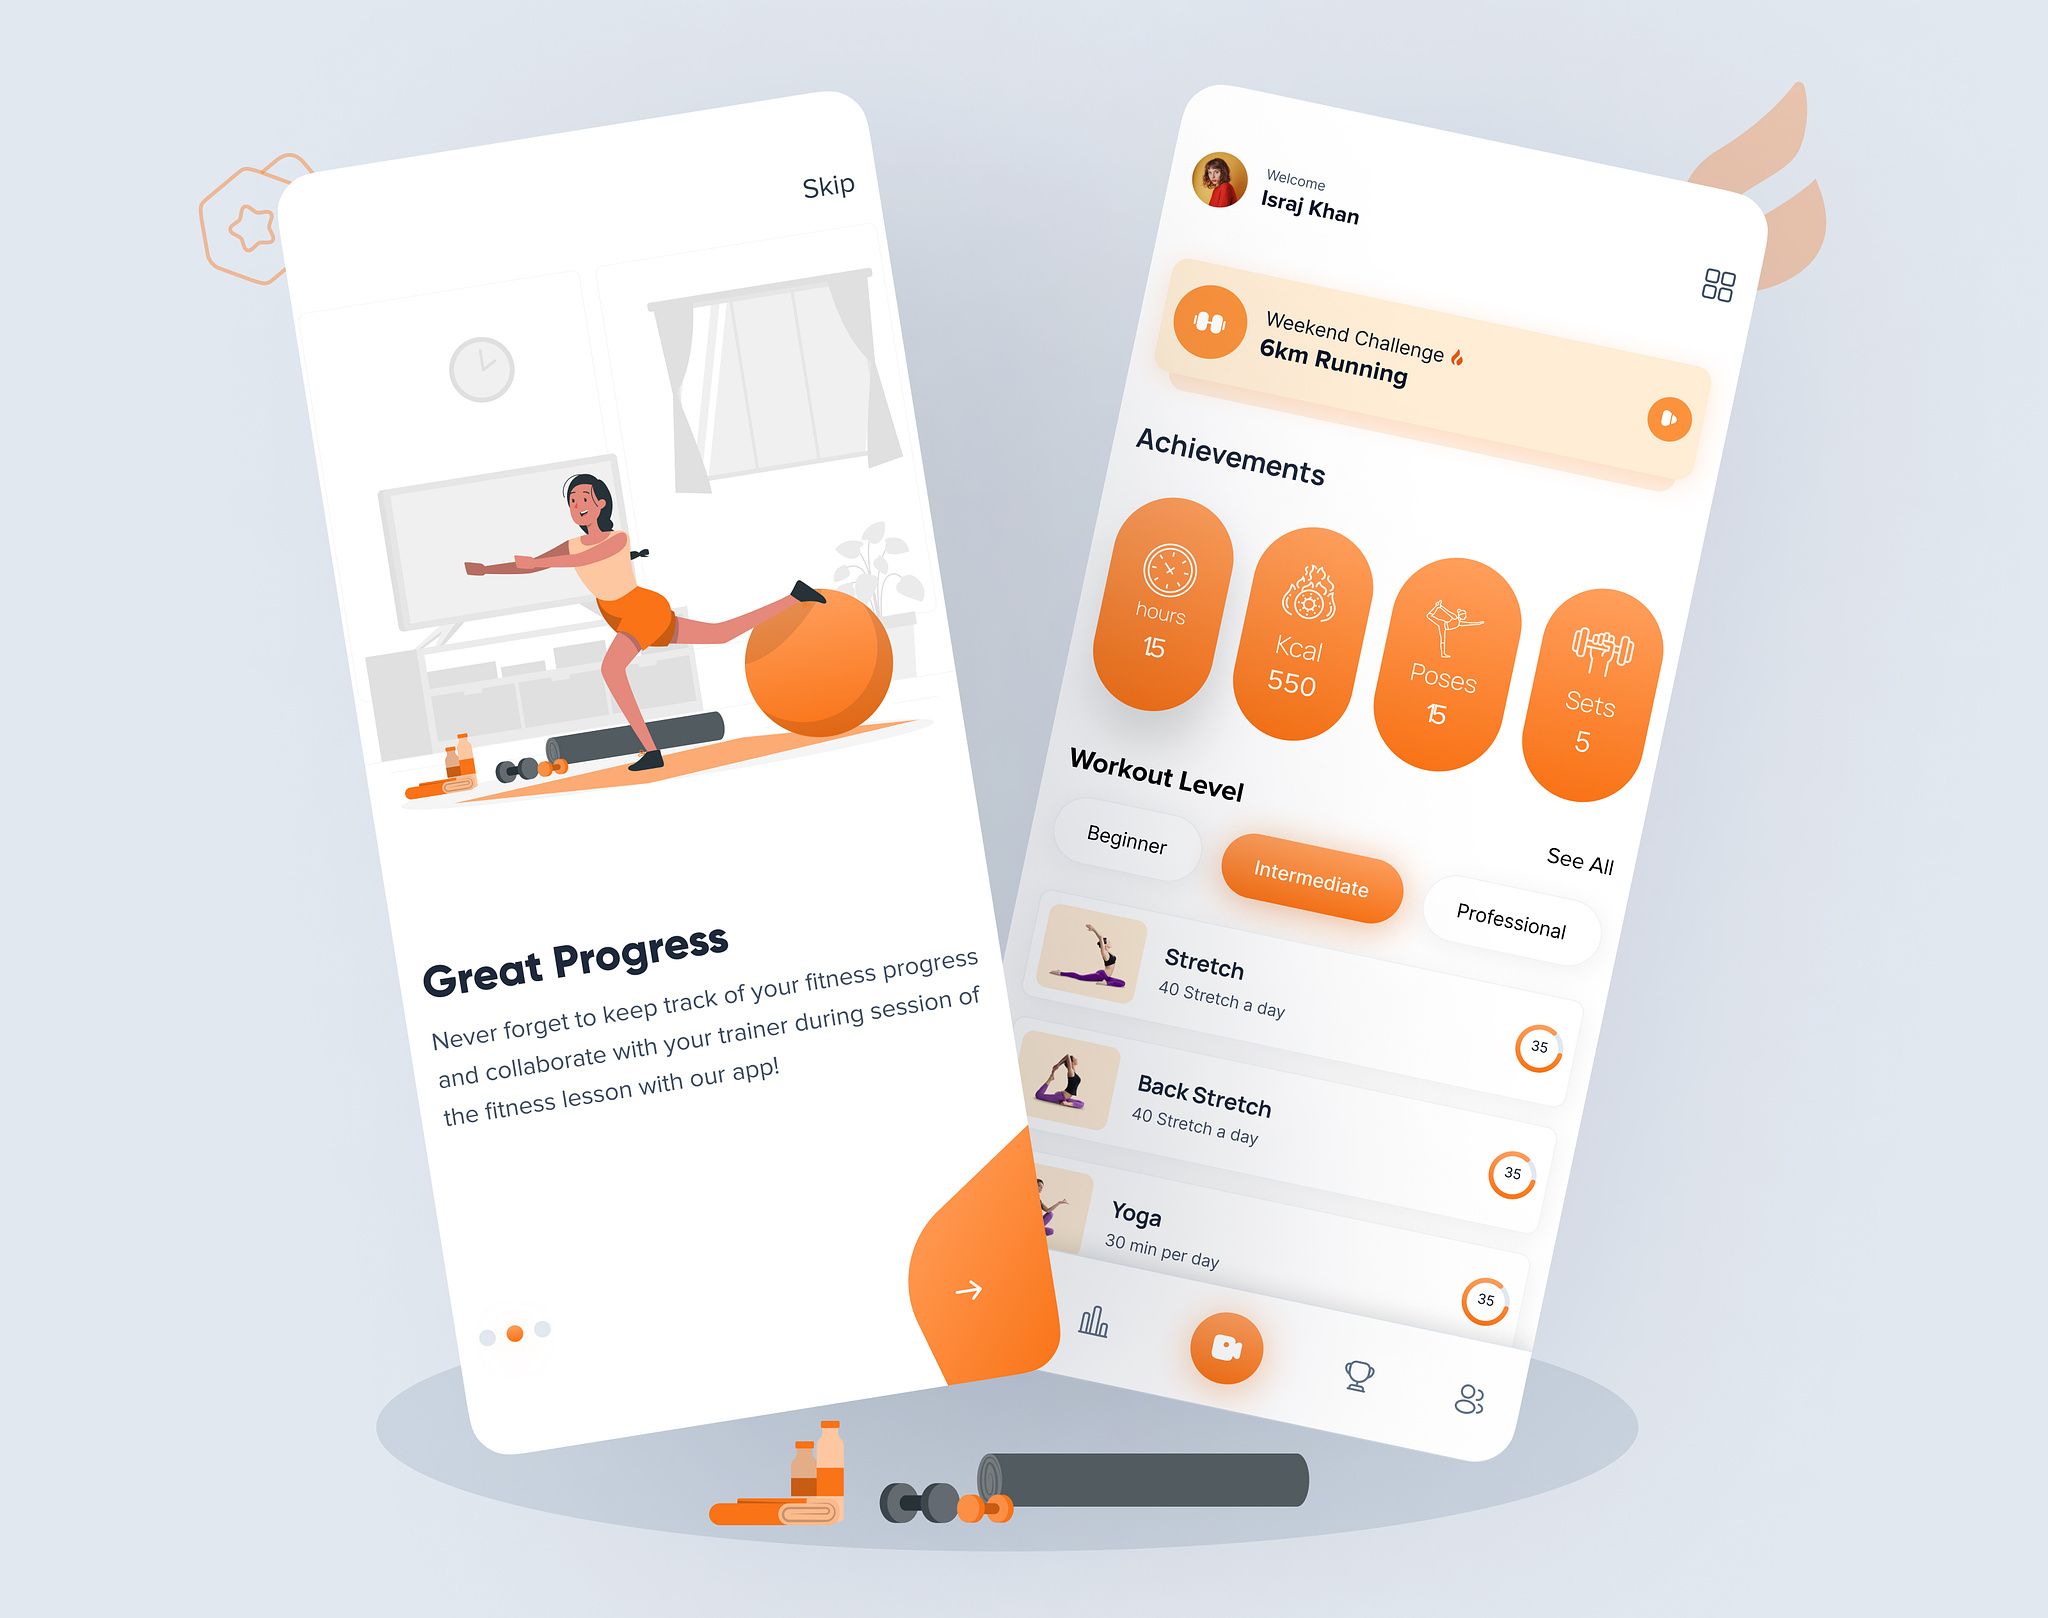 An example of how to build a personal trainer application with an illustration